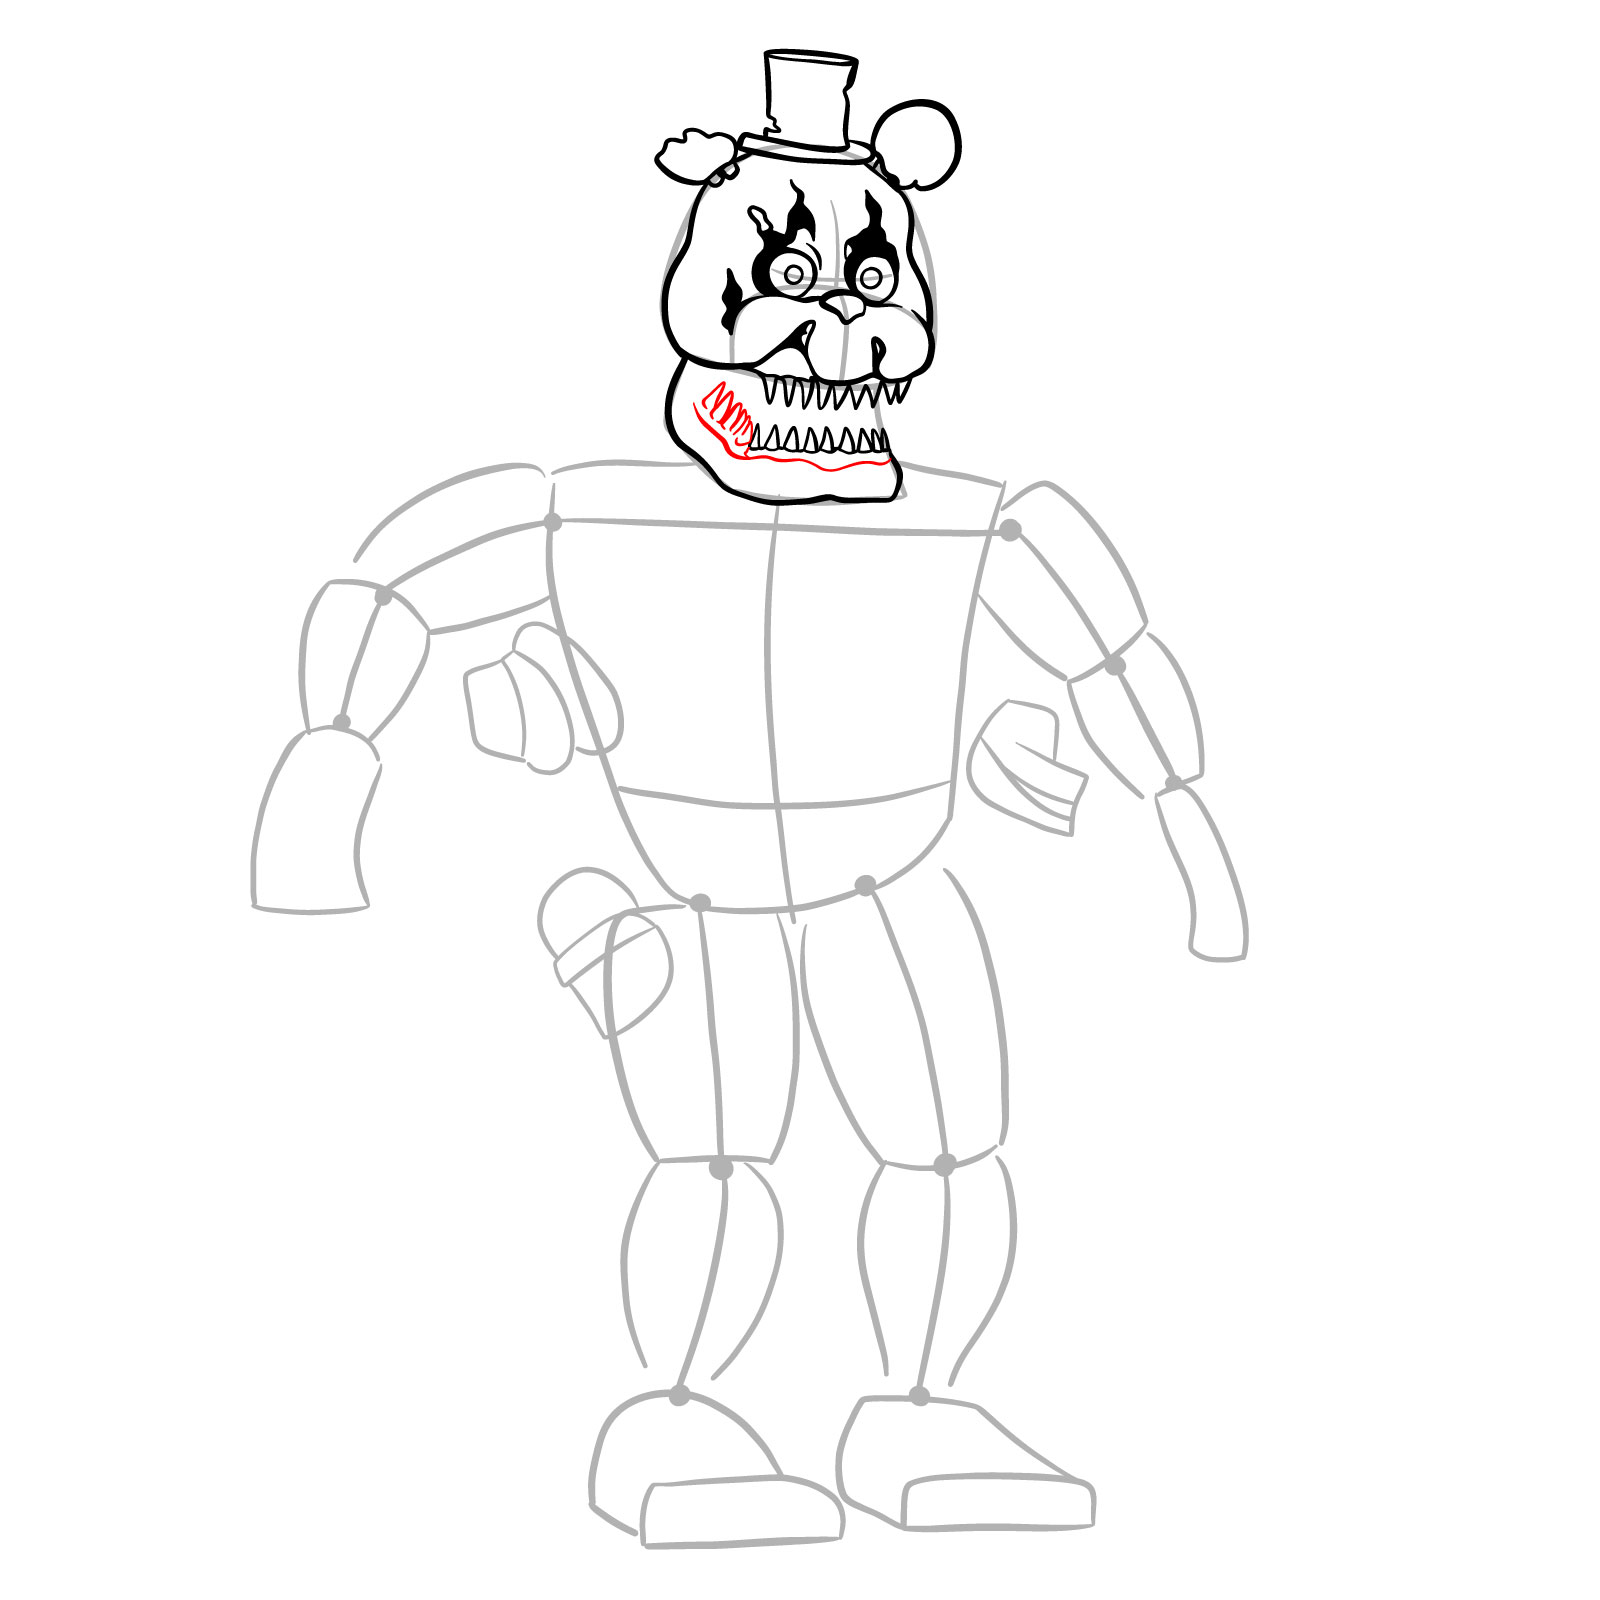 How to draw Nightmare Freddy - step 13